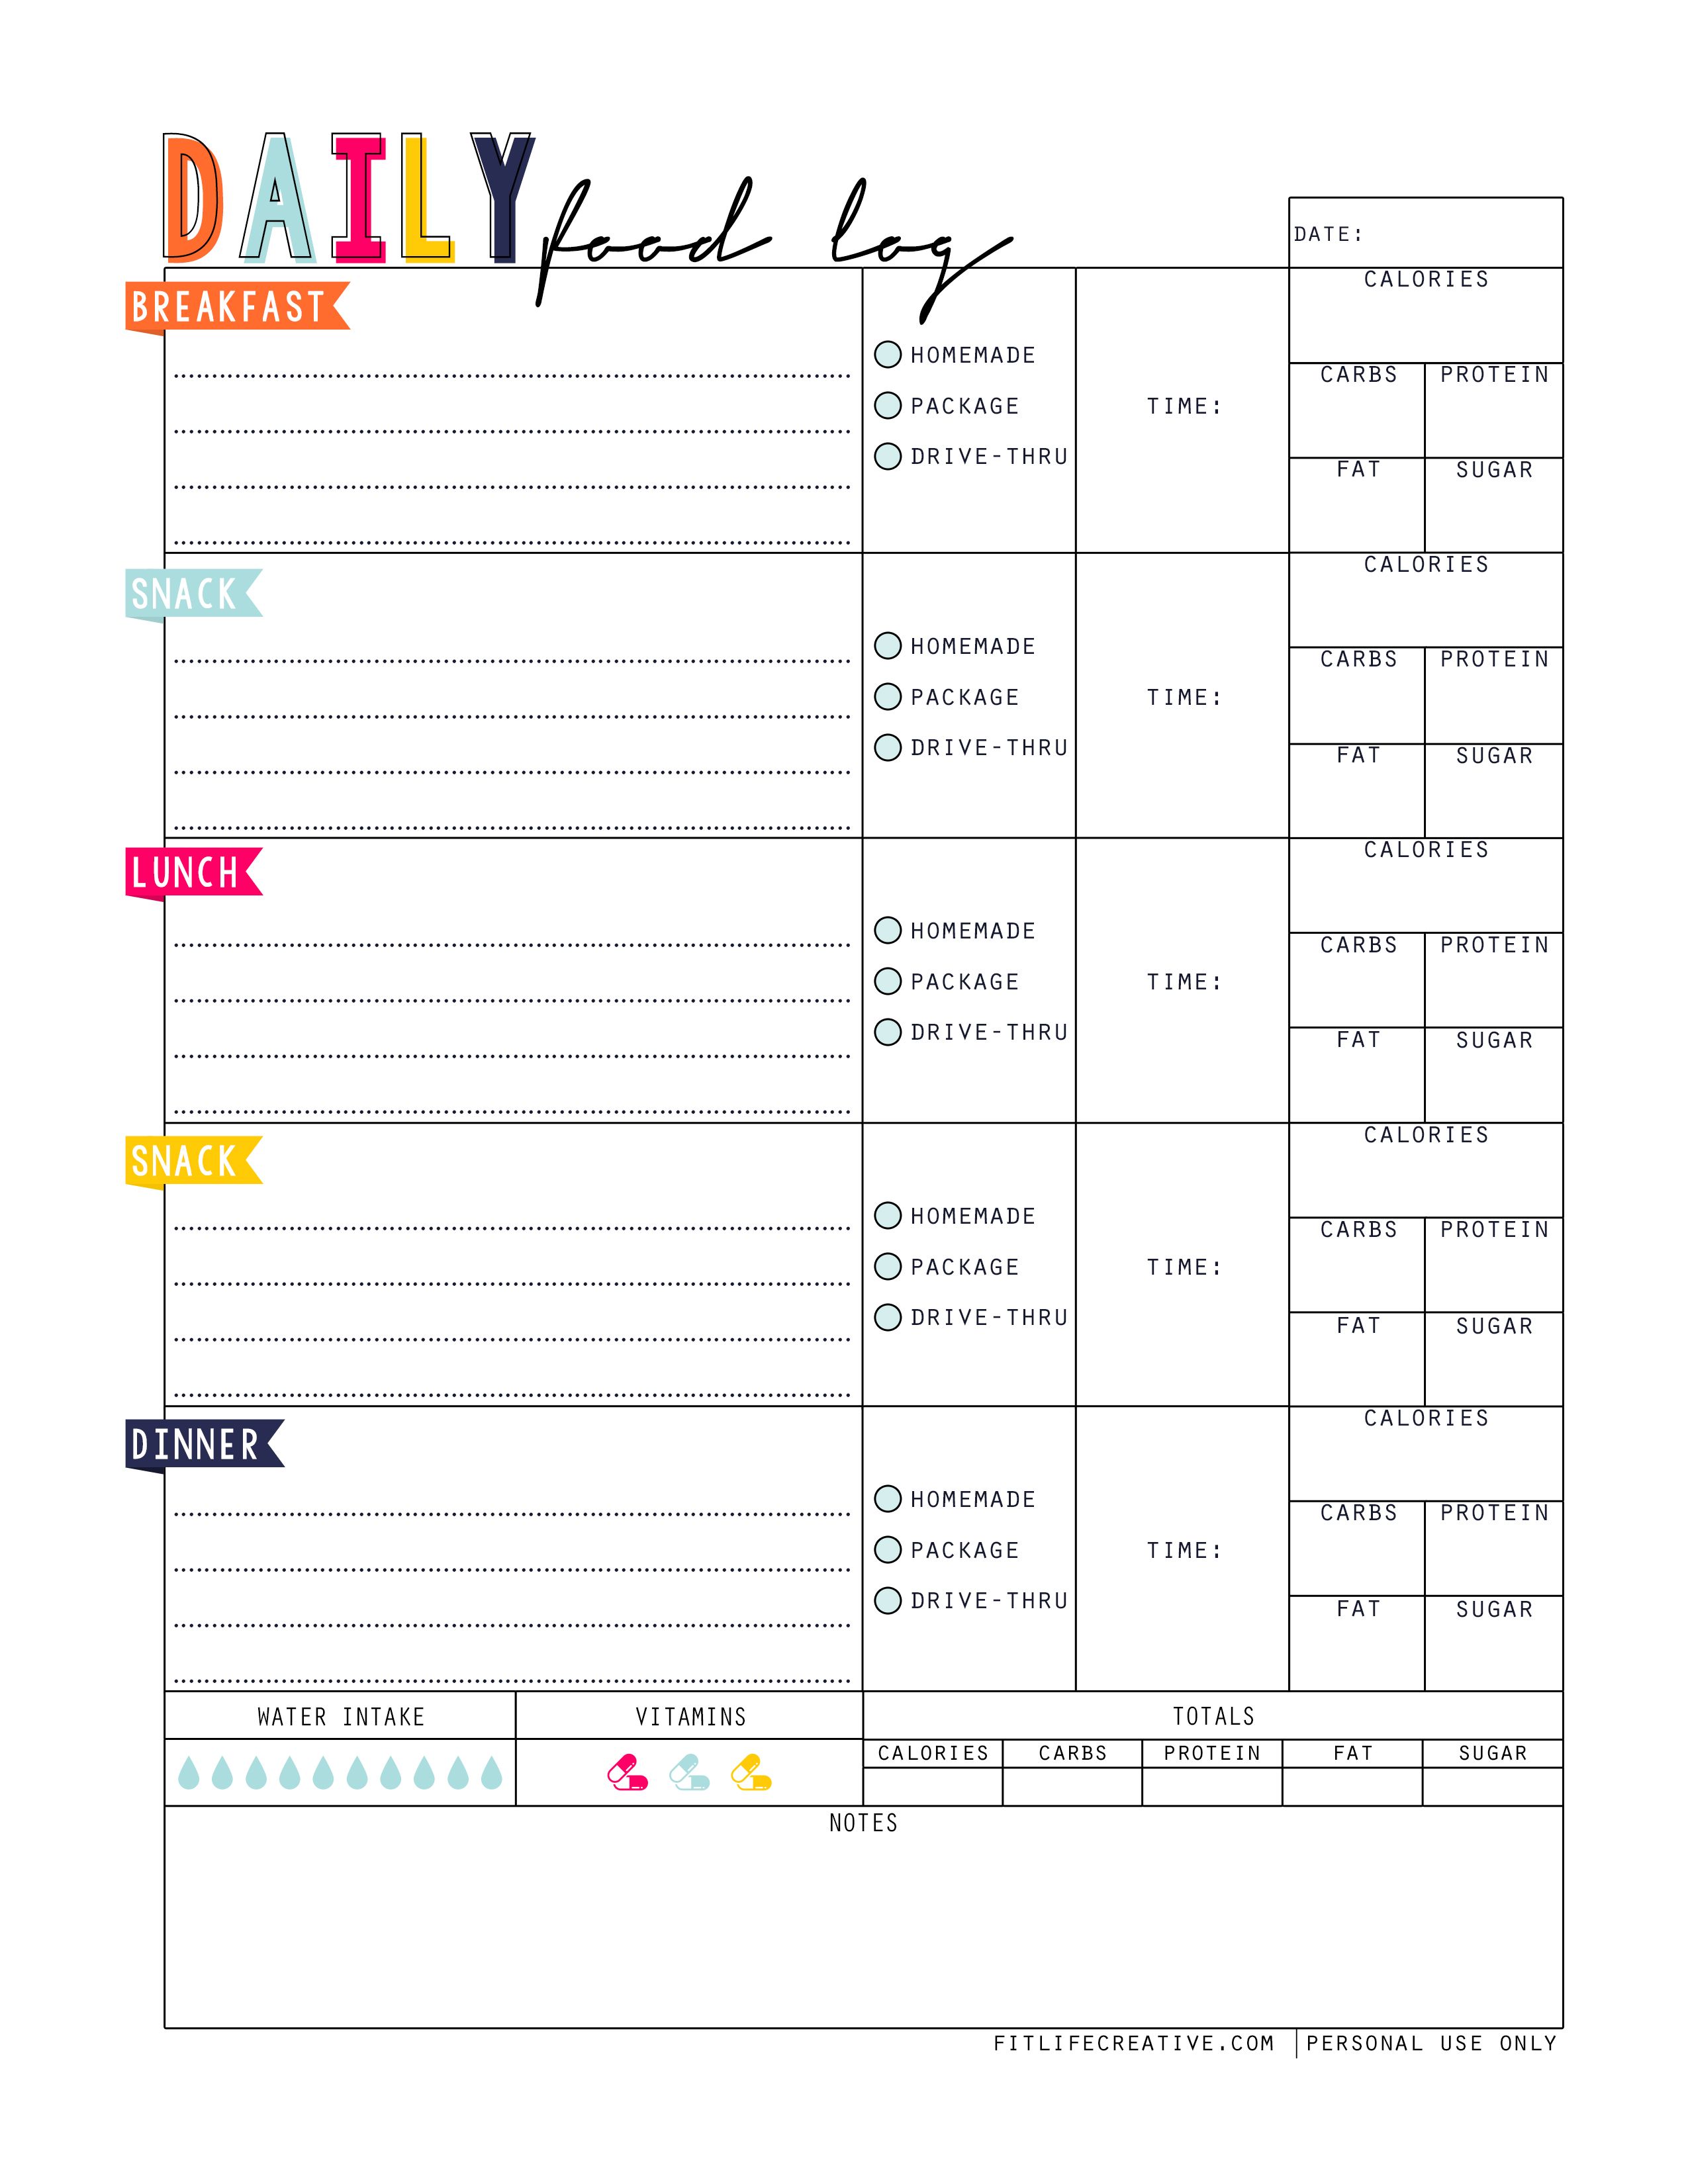 Daily Food Log Printable A successful health and fitness journey 